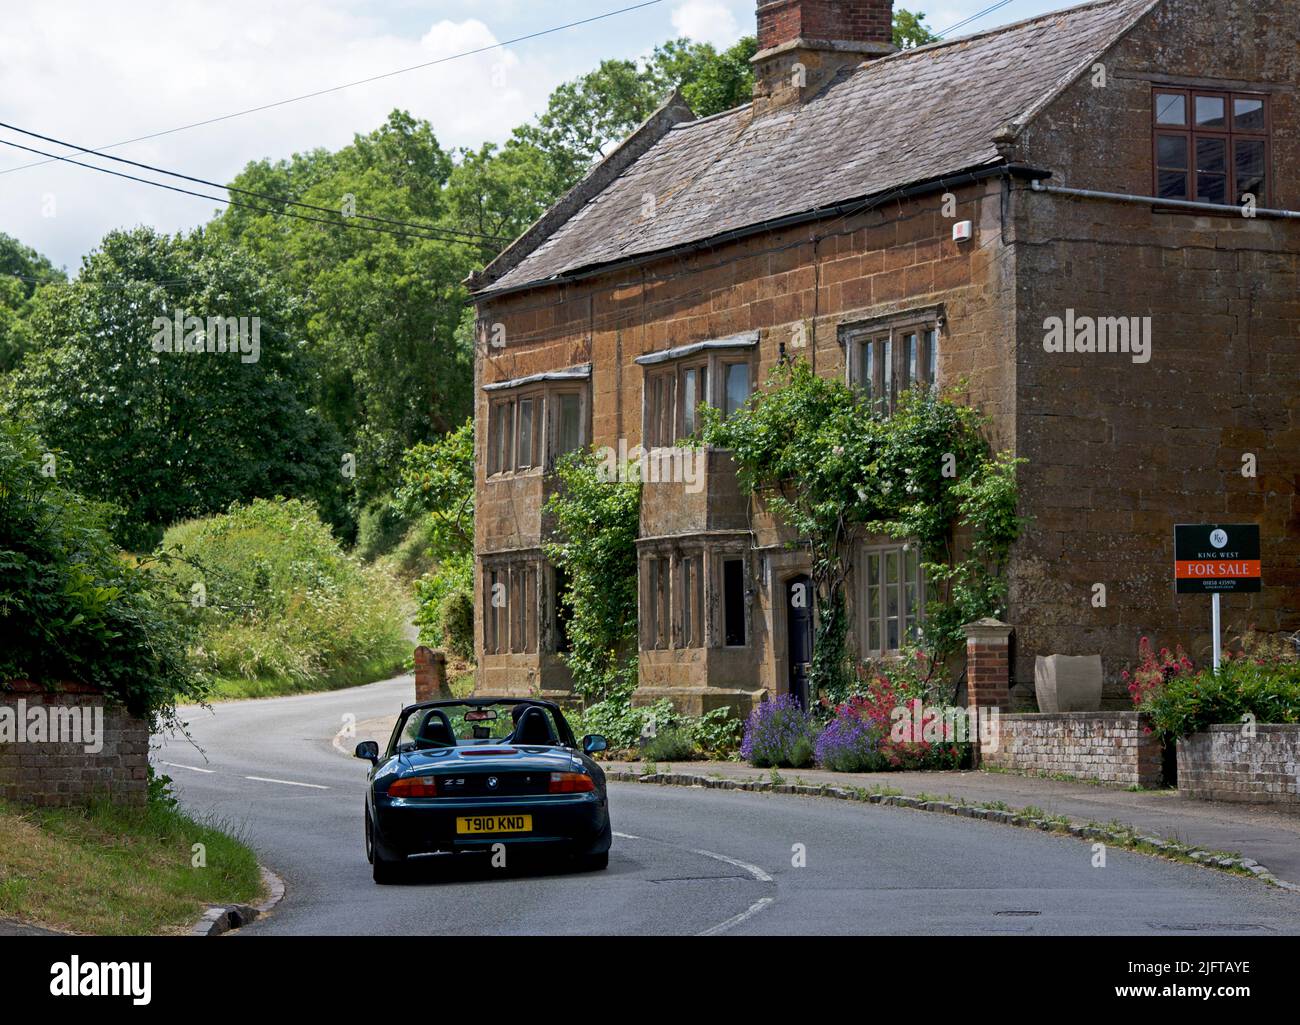 BMW Z3 sports car in the village of Weston by Welland, Northamptonshire, England UK Stock Photo